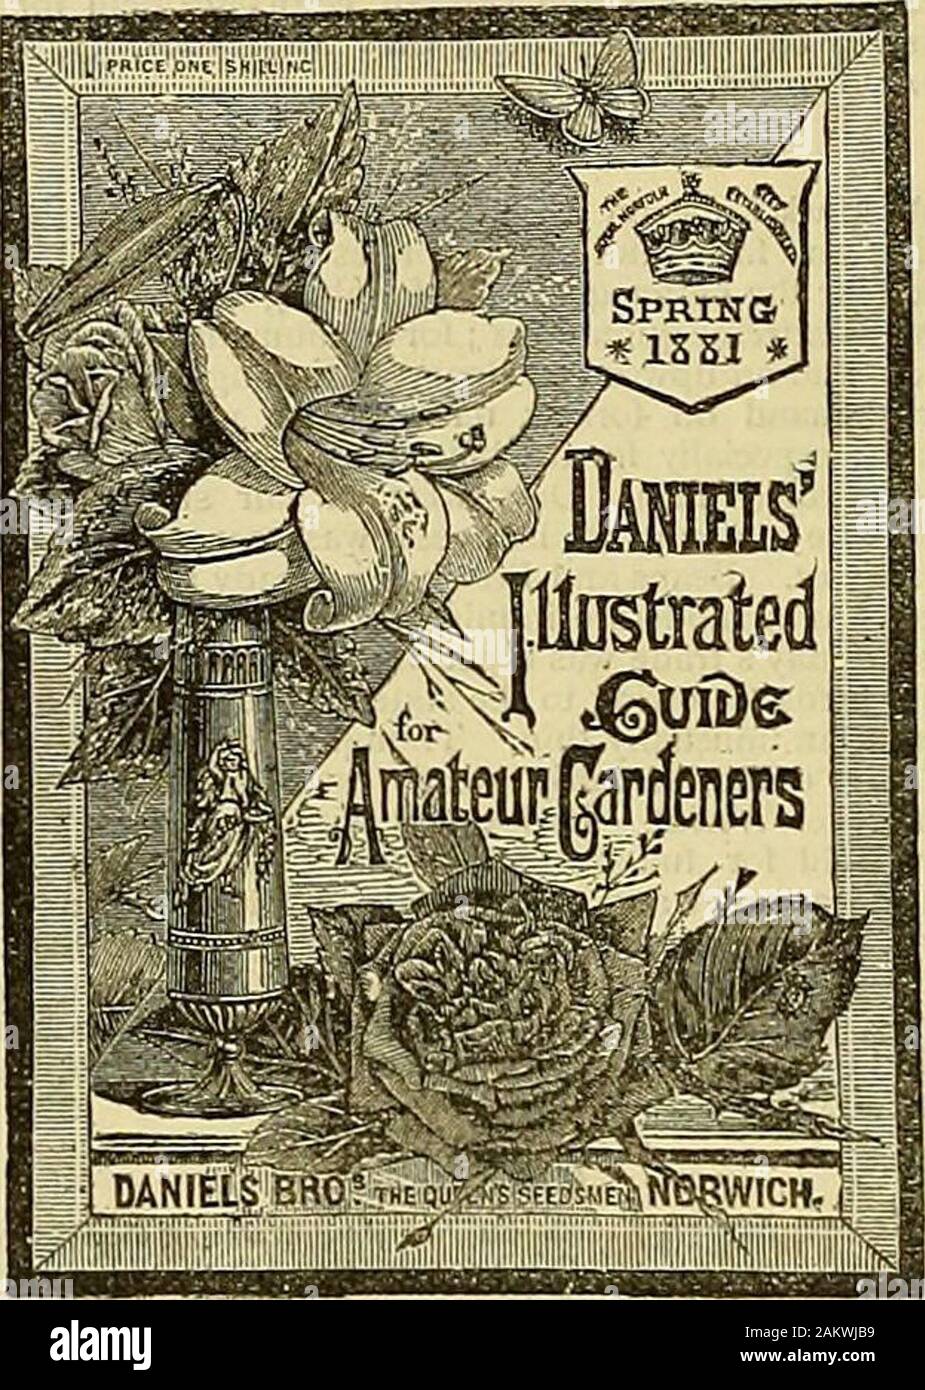 The Gardeners' chronicle : a weekly illustrated journal of horticulture and allied subjects . D. Seedling Thorns and otlier Forest Trees, Hardy CONIFERS and SHRUBS, CHEAP. MESSRS. LEVAVASSEUR and SON,NuREERYMEW, Ussy, Calvados, France.—CATA-LOGUES post-free on application to them, or to their Agents, Messrs. R. SILBERRAD and SON, 25, Savage Gardens,London, E.C. TO THE TRADE. PRIMROSE, double white, fine plants, 145. per 100.PRIMROSE, double lilac, fine plants, 12J. dd. per 100. ,. „ yellow, fine plants—these are very fine plants, fullof flower-buds, suitable for pots or window boxes^14^. per 1 Stock Photo